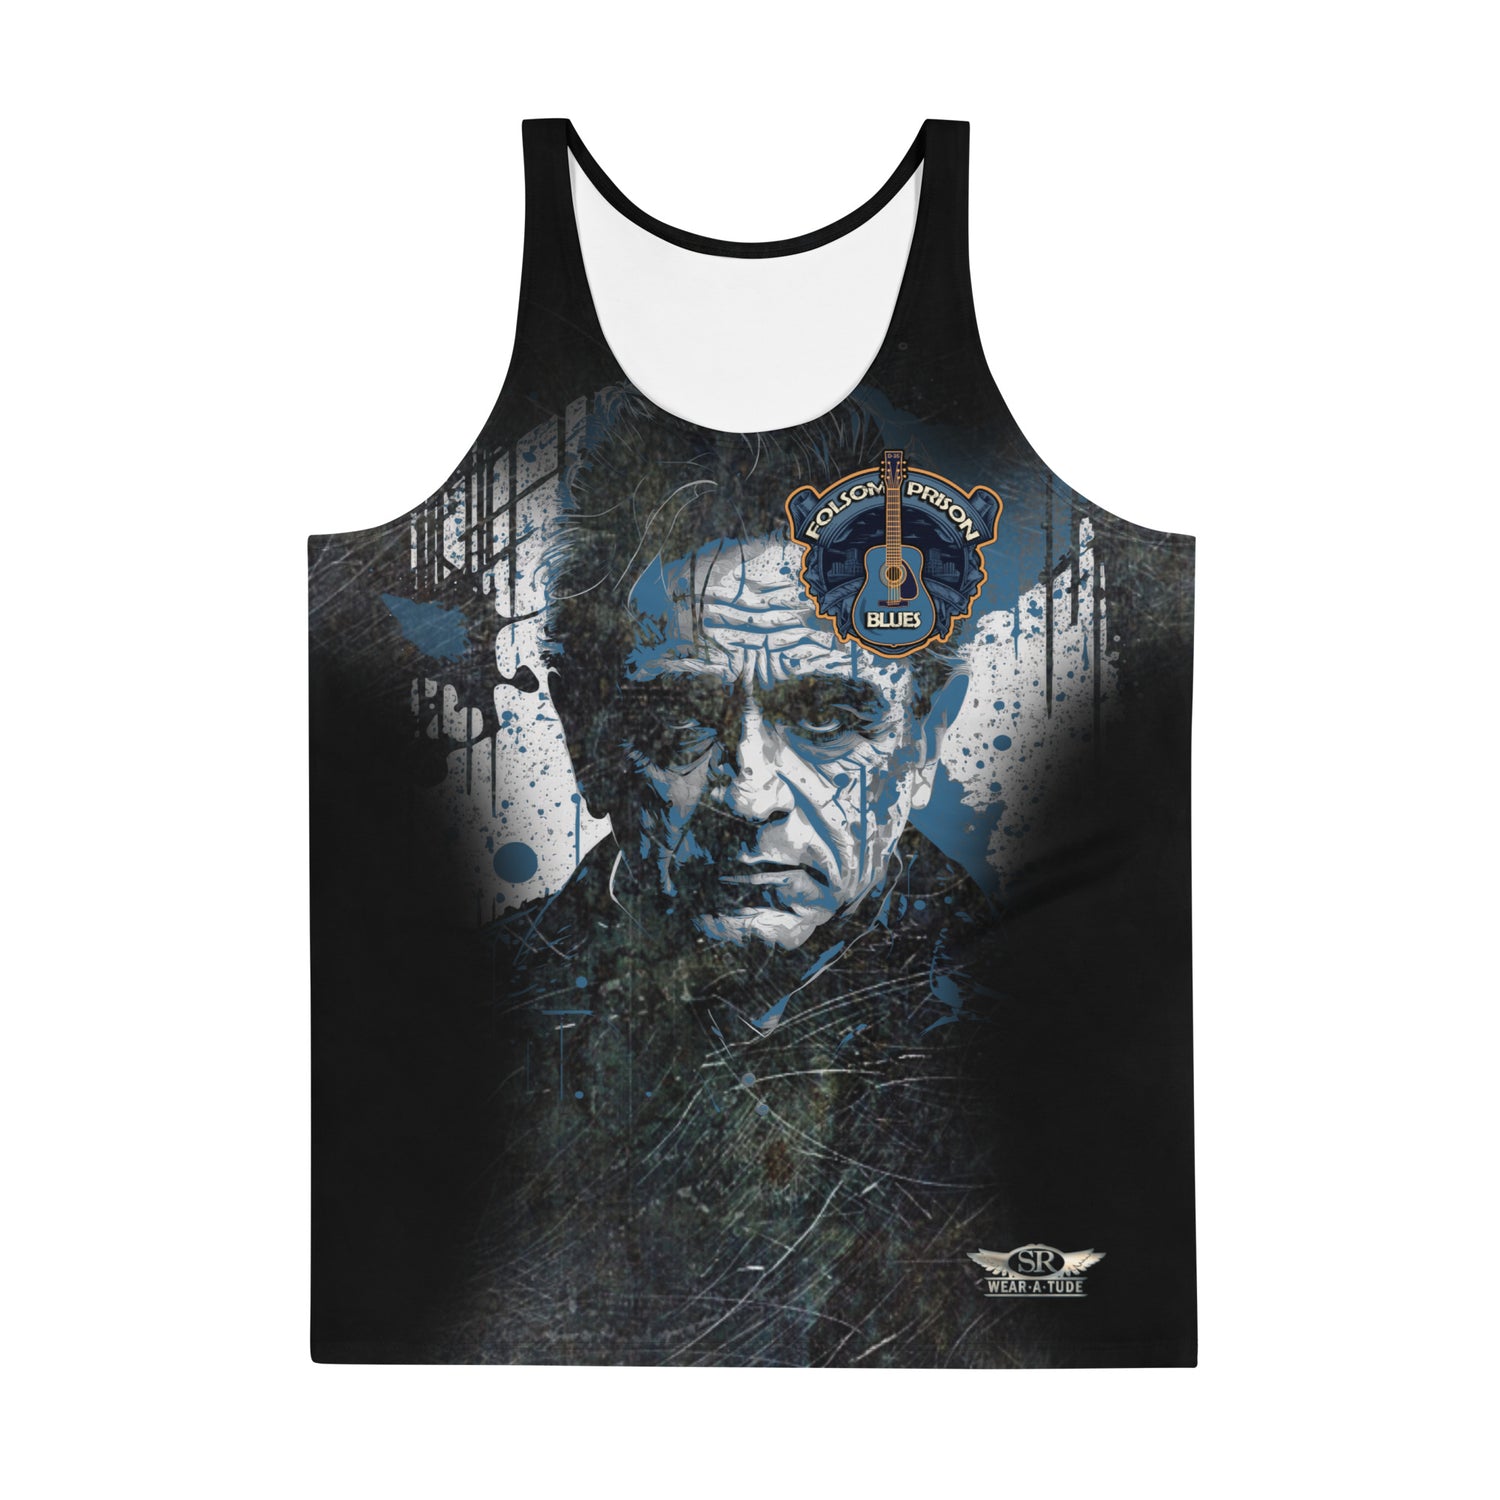 Folsom Prison Blues. Grunge Johnny Cash tank t-shirt design.he legendary Johnny Cash and the iconic Folsom Prison Blues. This has a vintage distressed finish of bronze and blue with a graffiti-inspired portraiture. Perfect for lovers of classic rock and country music.